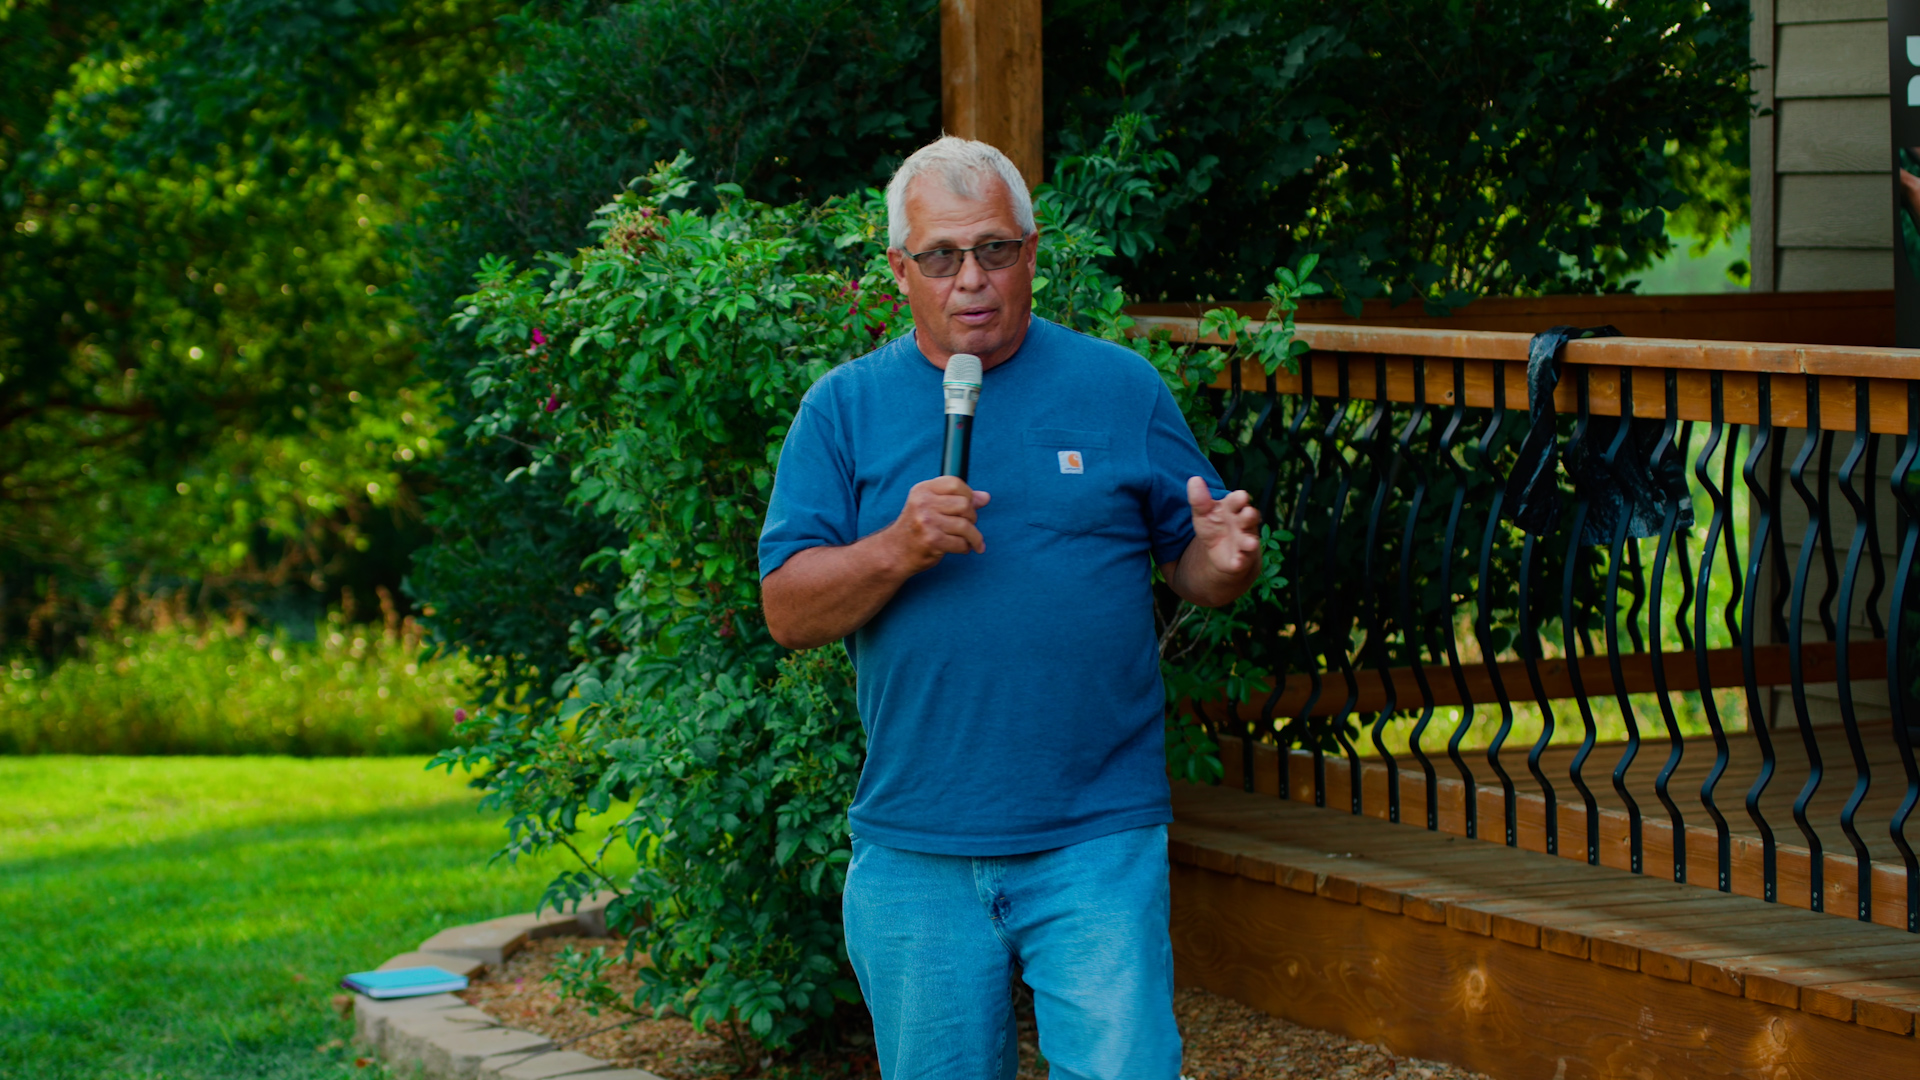 Dan Forgey speaks in front of a front porch while holding a microphone.